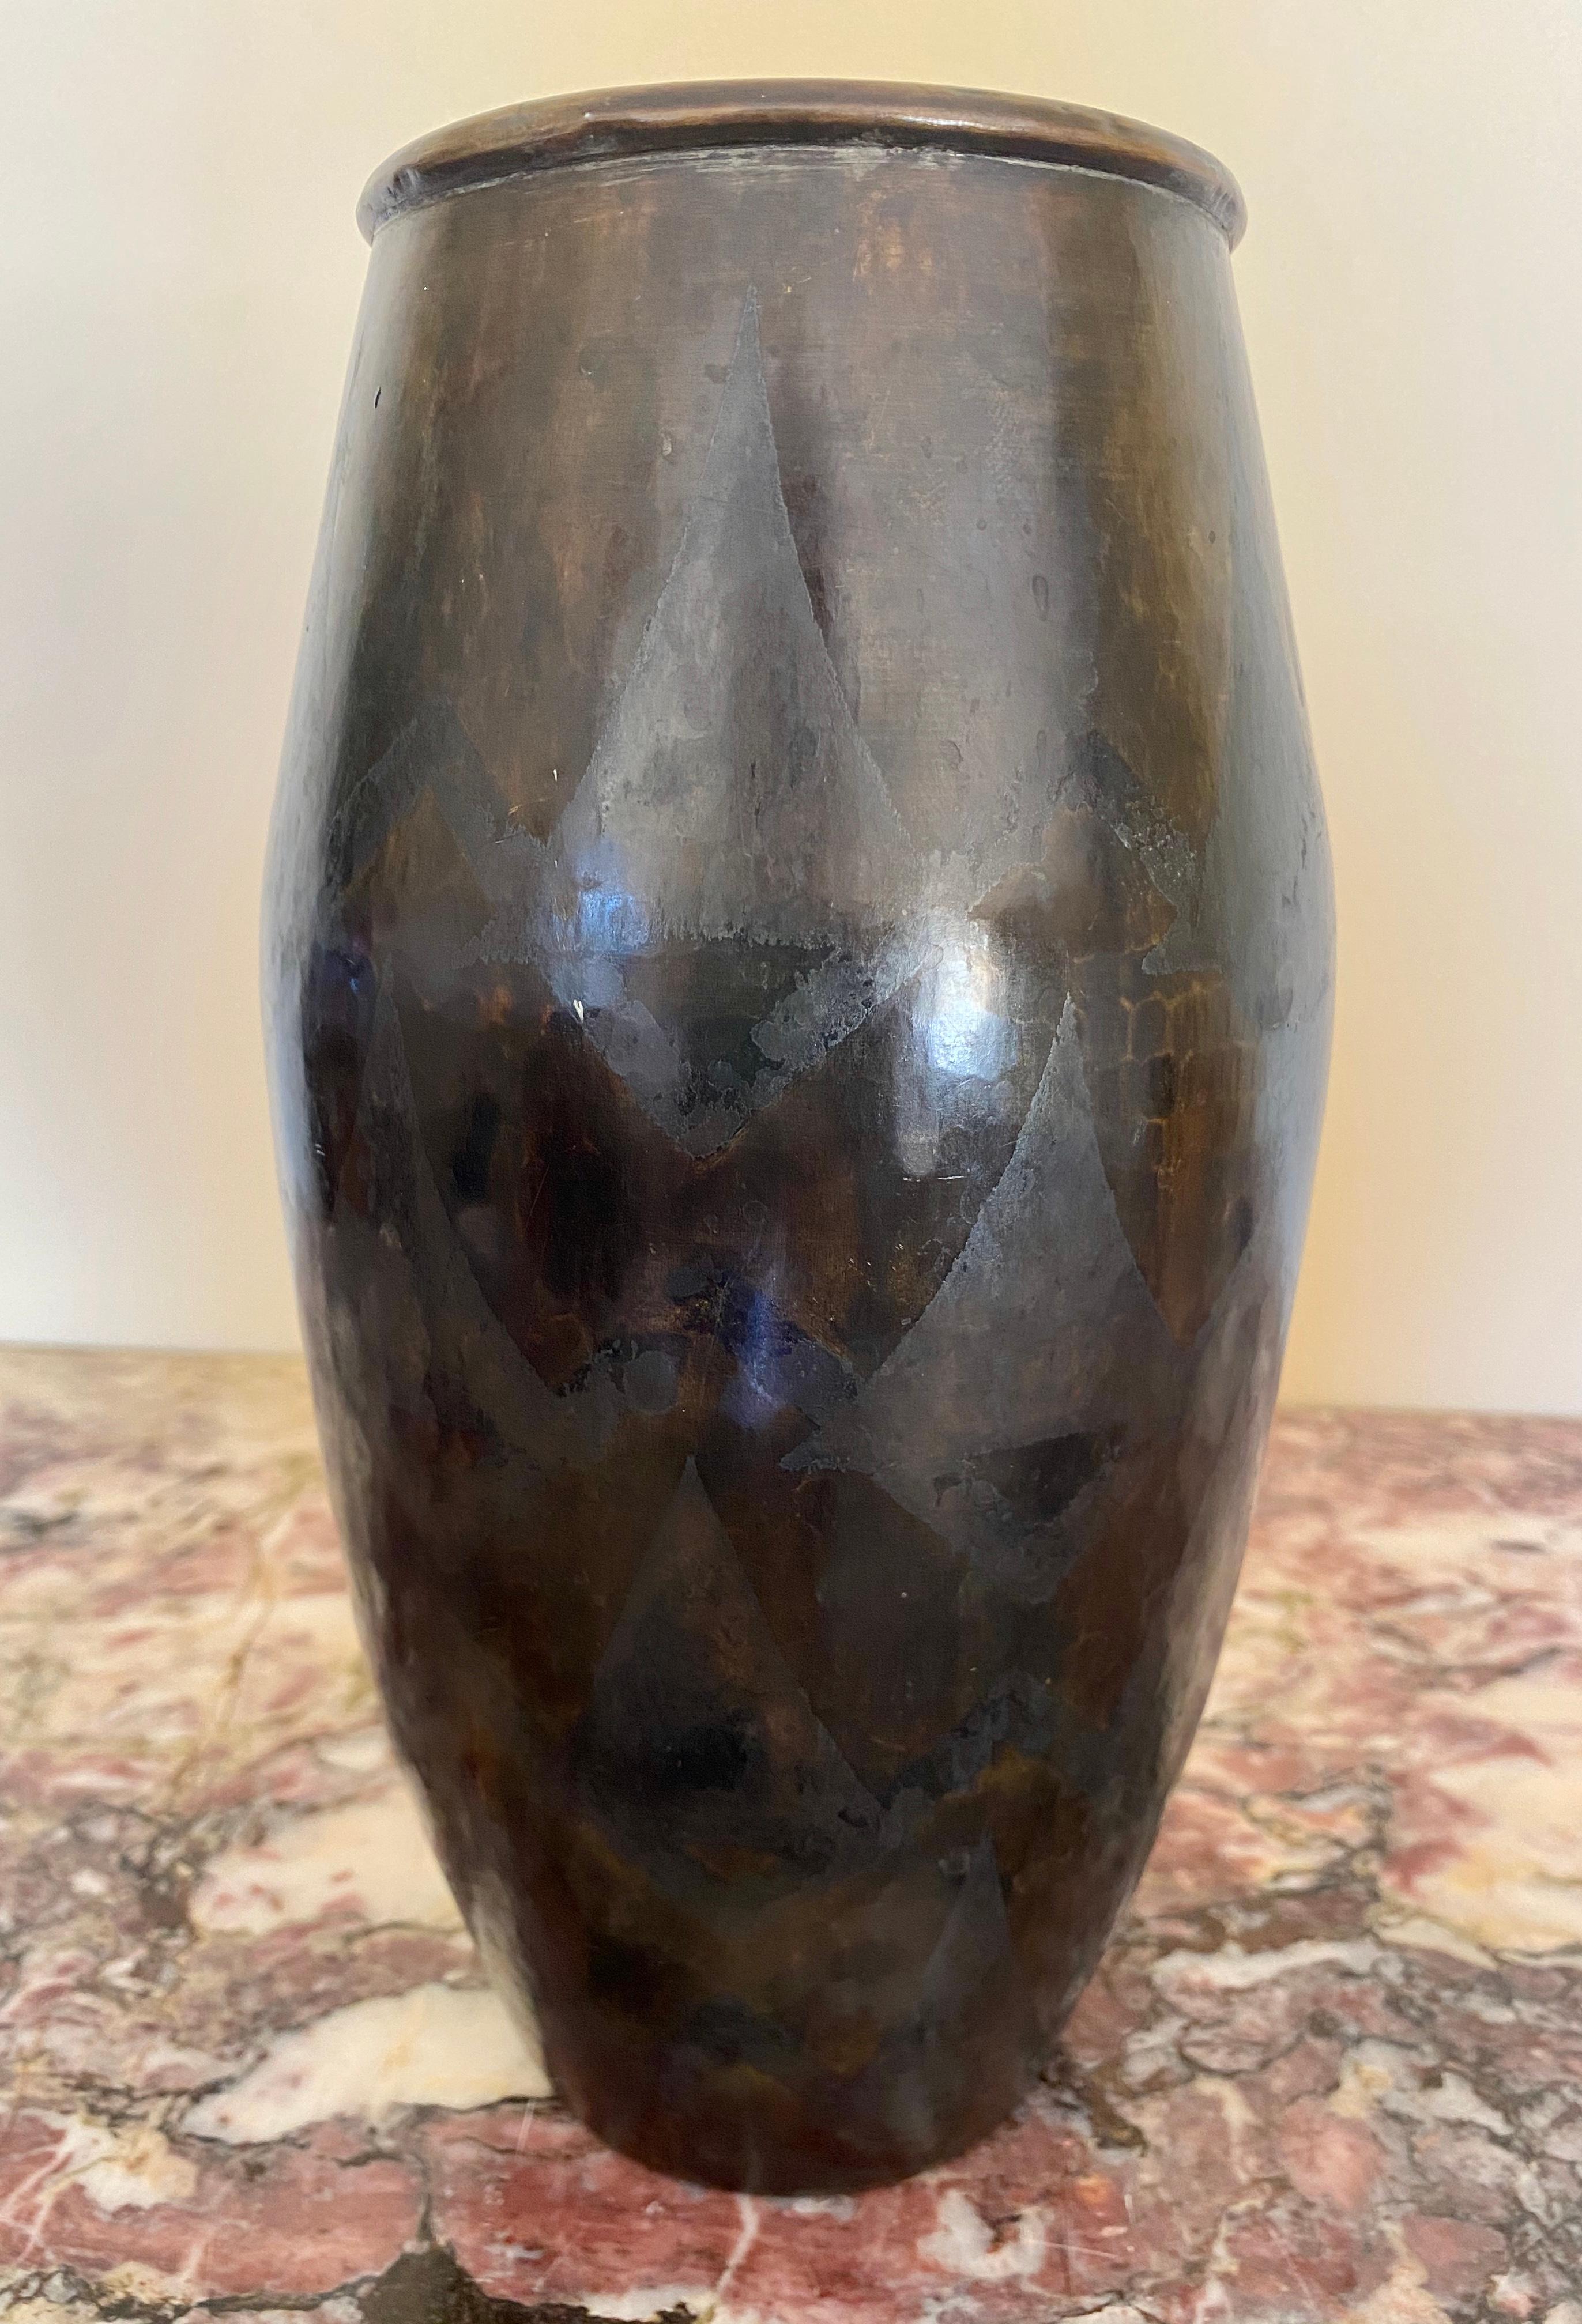 Large elongated ovoid vase in fully hammered brassware. Decor of overlapping triangles, oxidized silver and bronze on a background with nuanced brown patina. Circa 1930/1935.
Signed below 